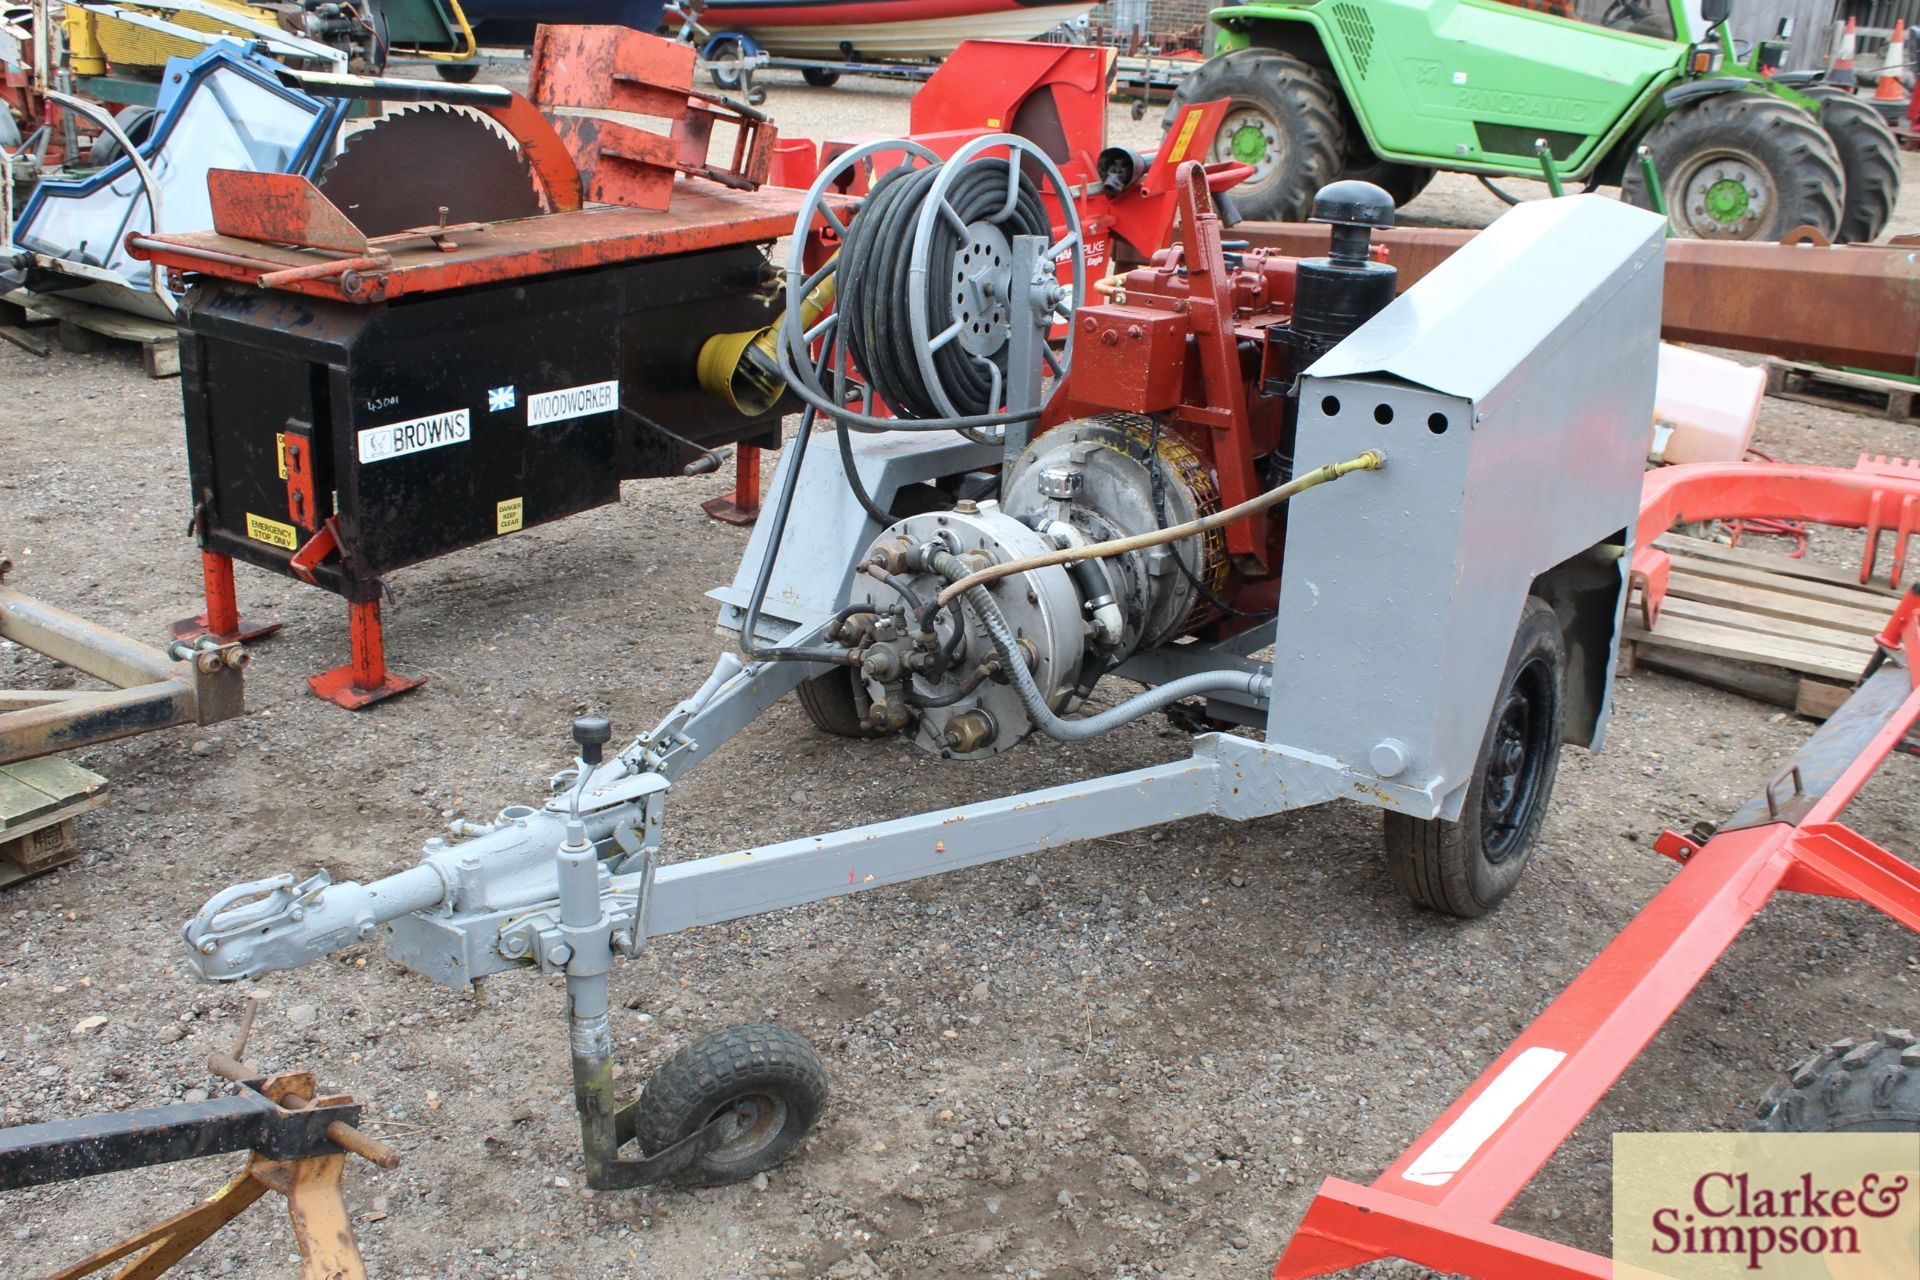 Harben fast tow high pressure drain jetter. With Lister diesel engine. - Image 2 of 8